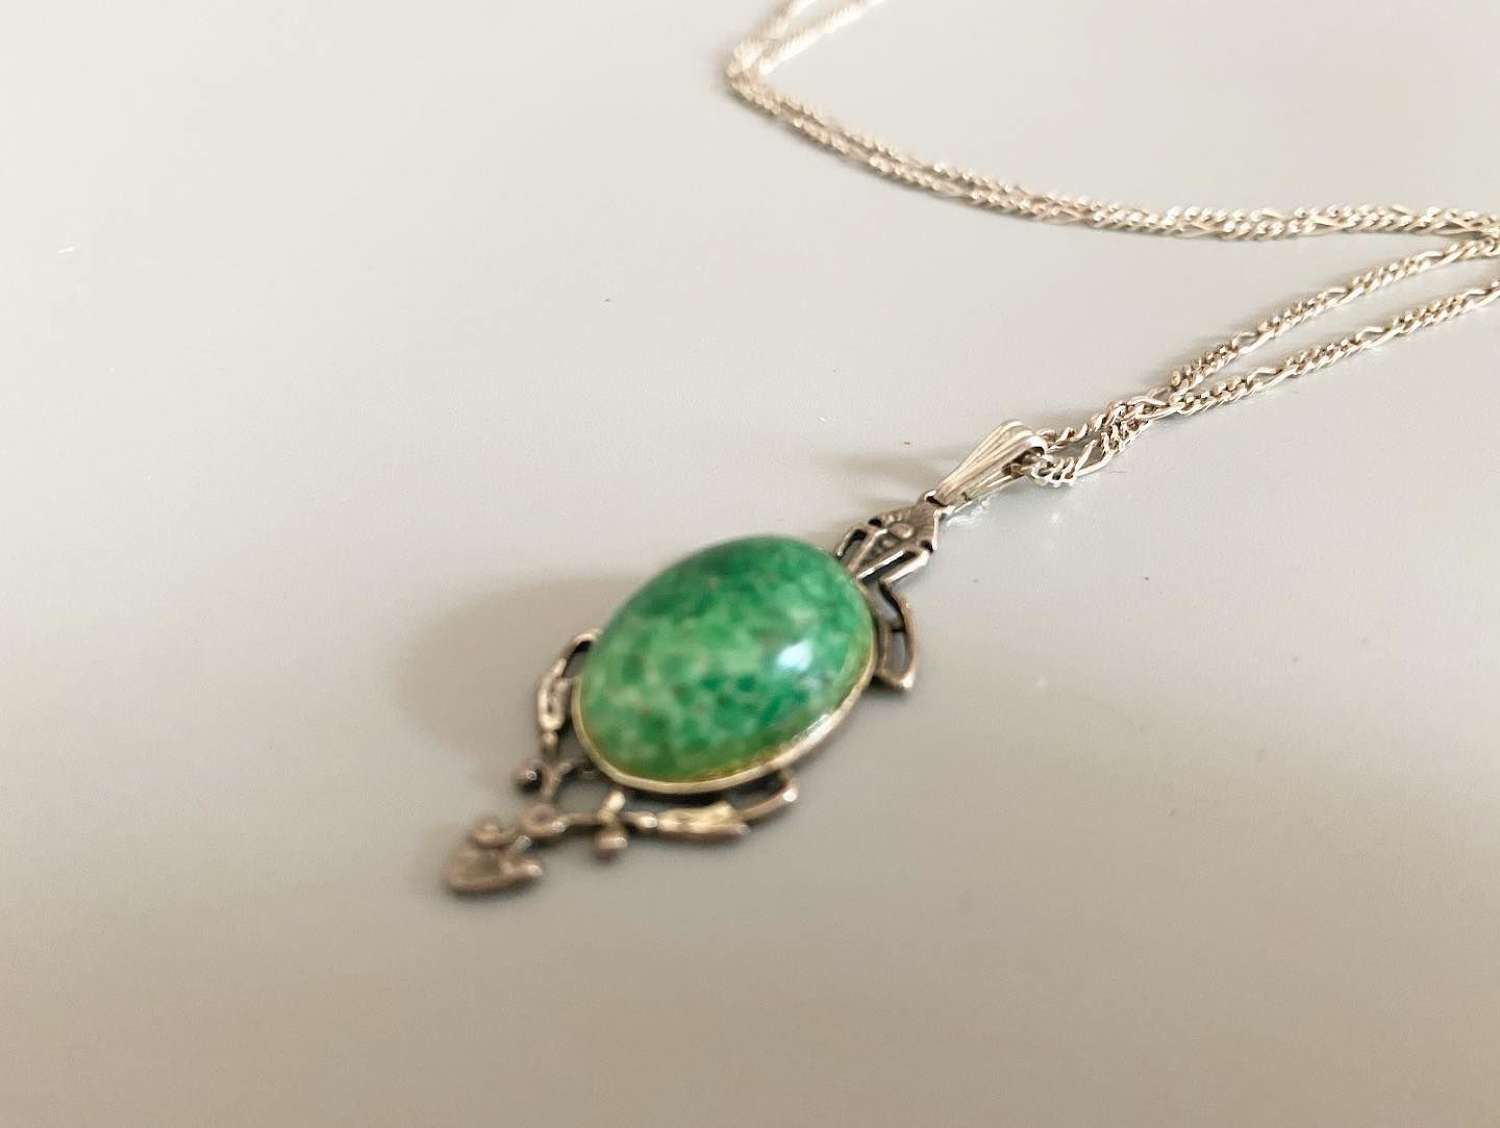 Silver Chain and Pendant with Green Agate